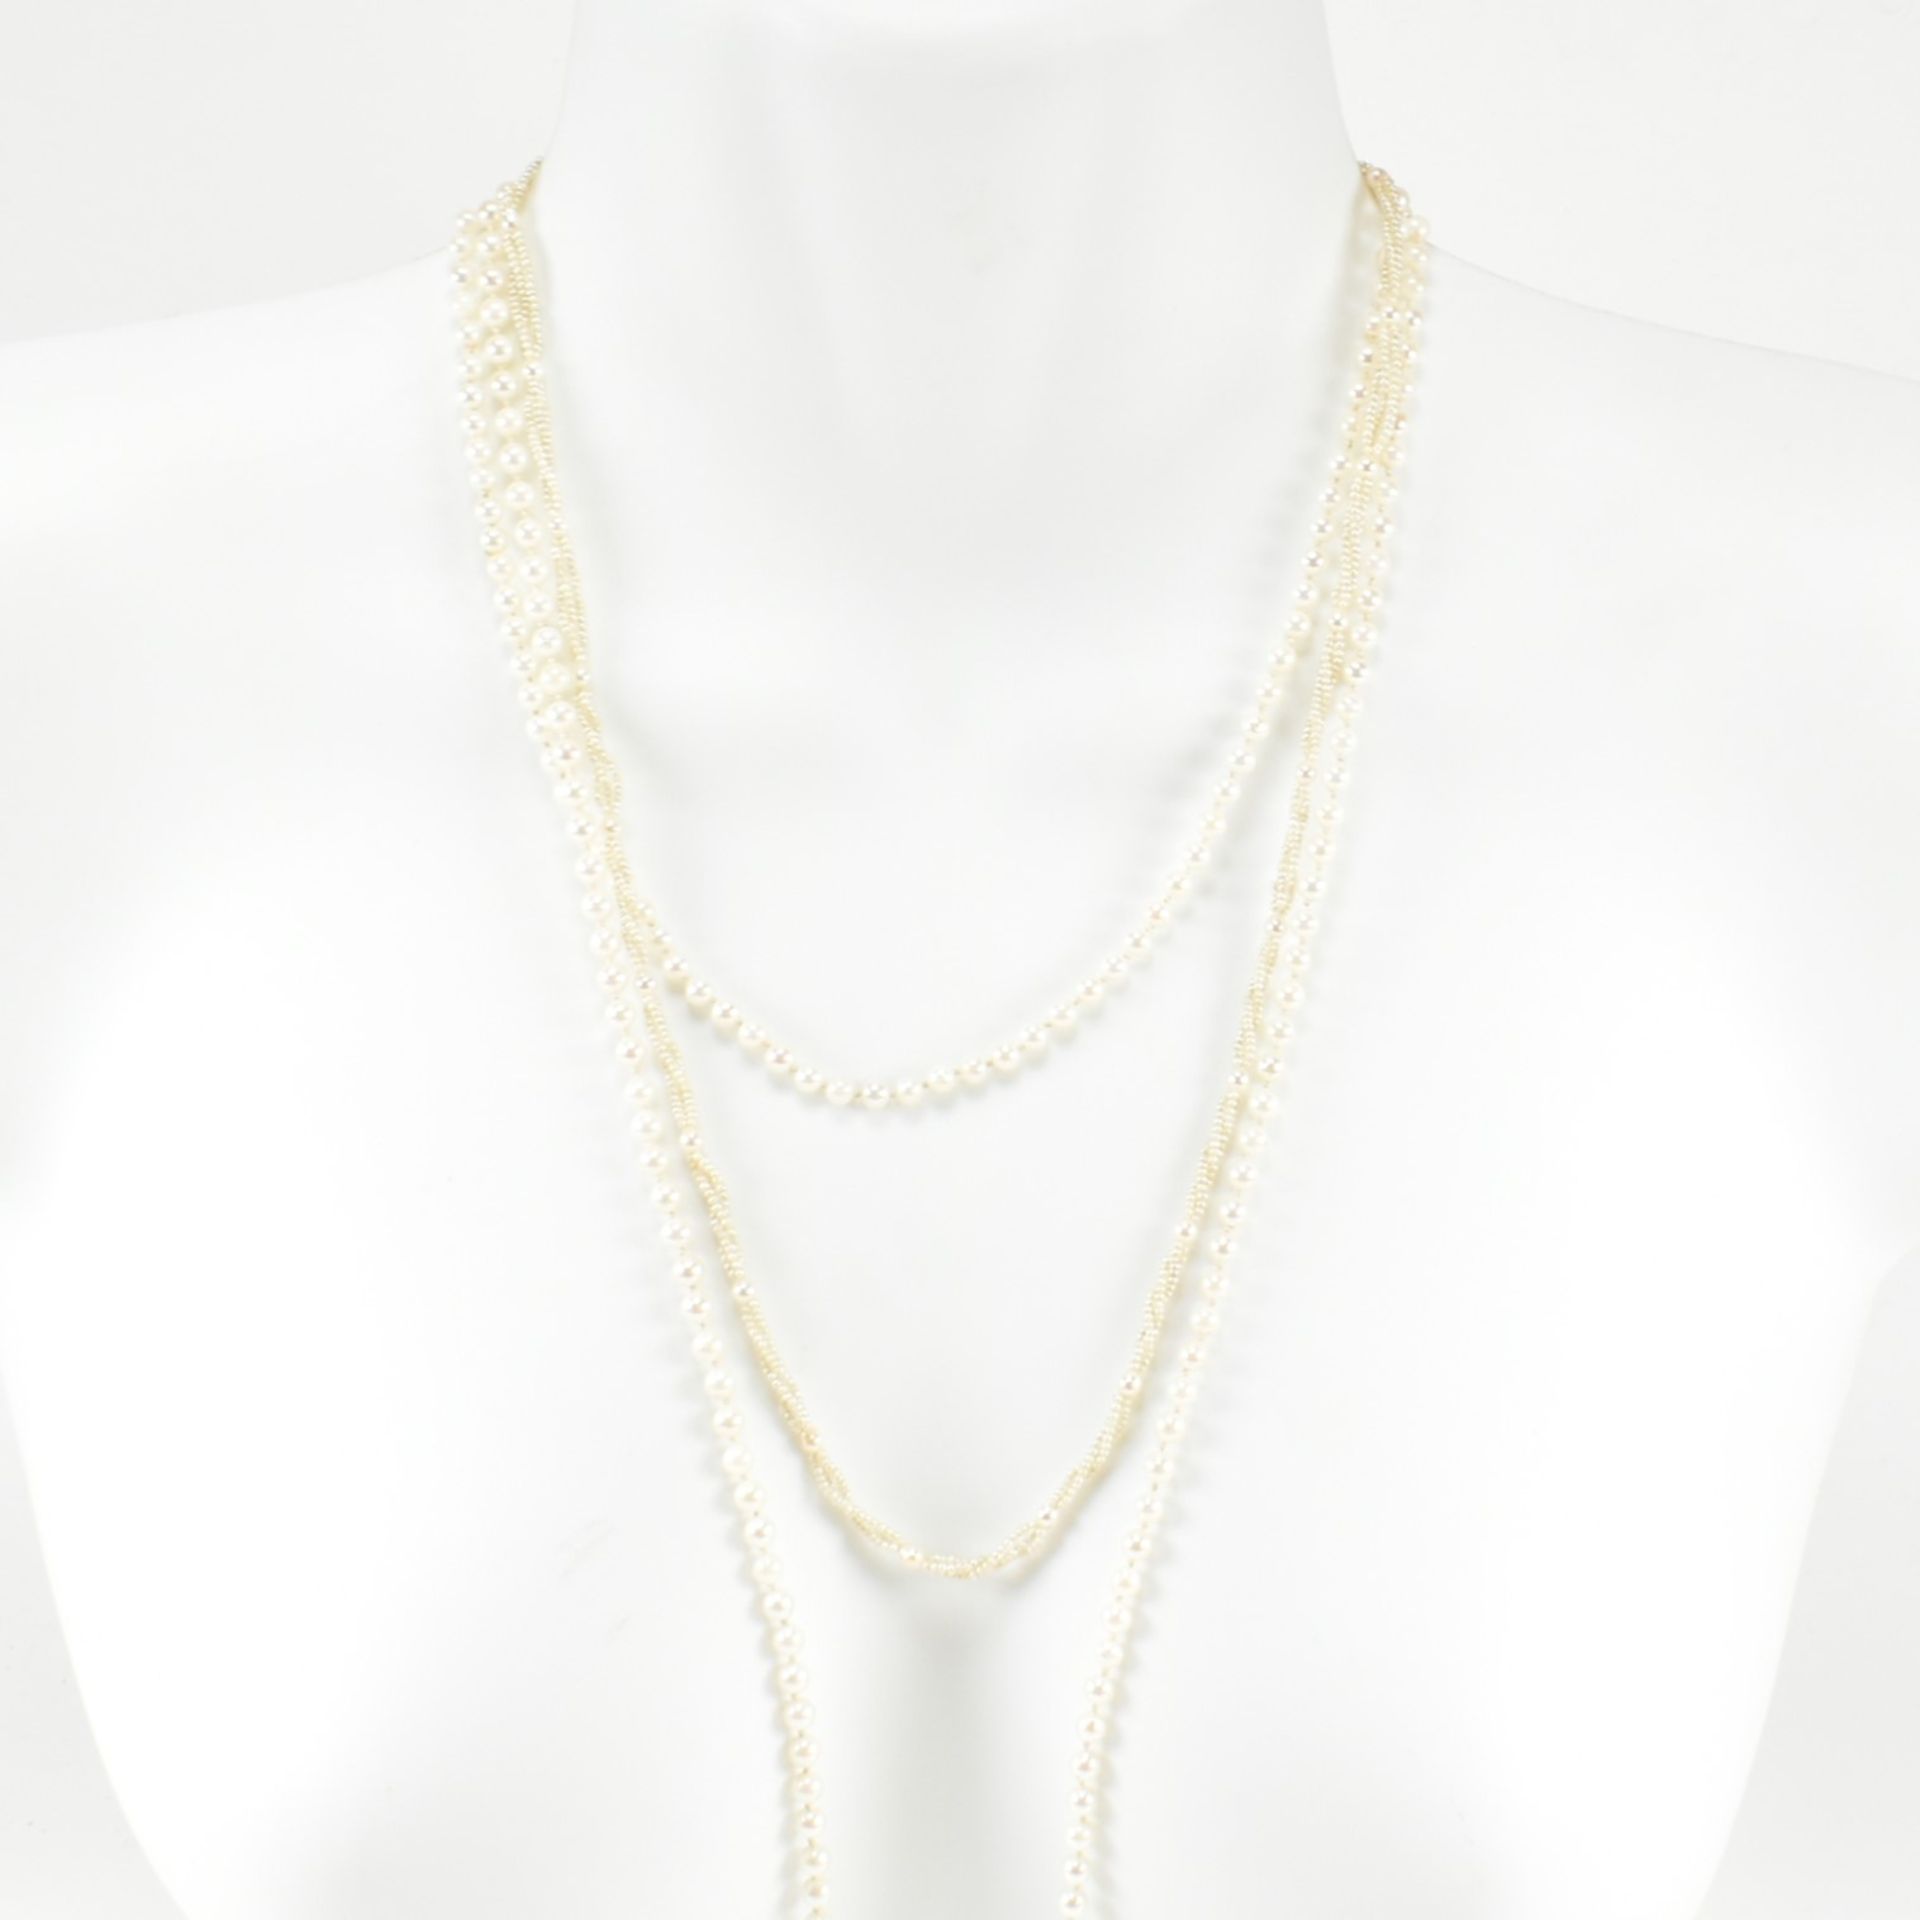 TWO PEARL NECKLACES - Image 5 of 6